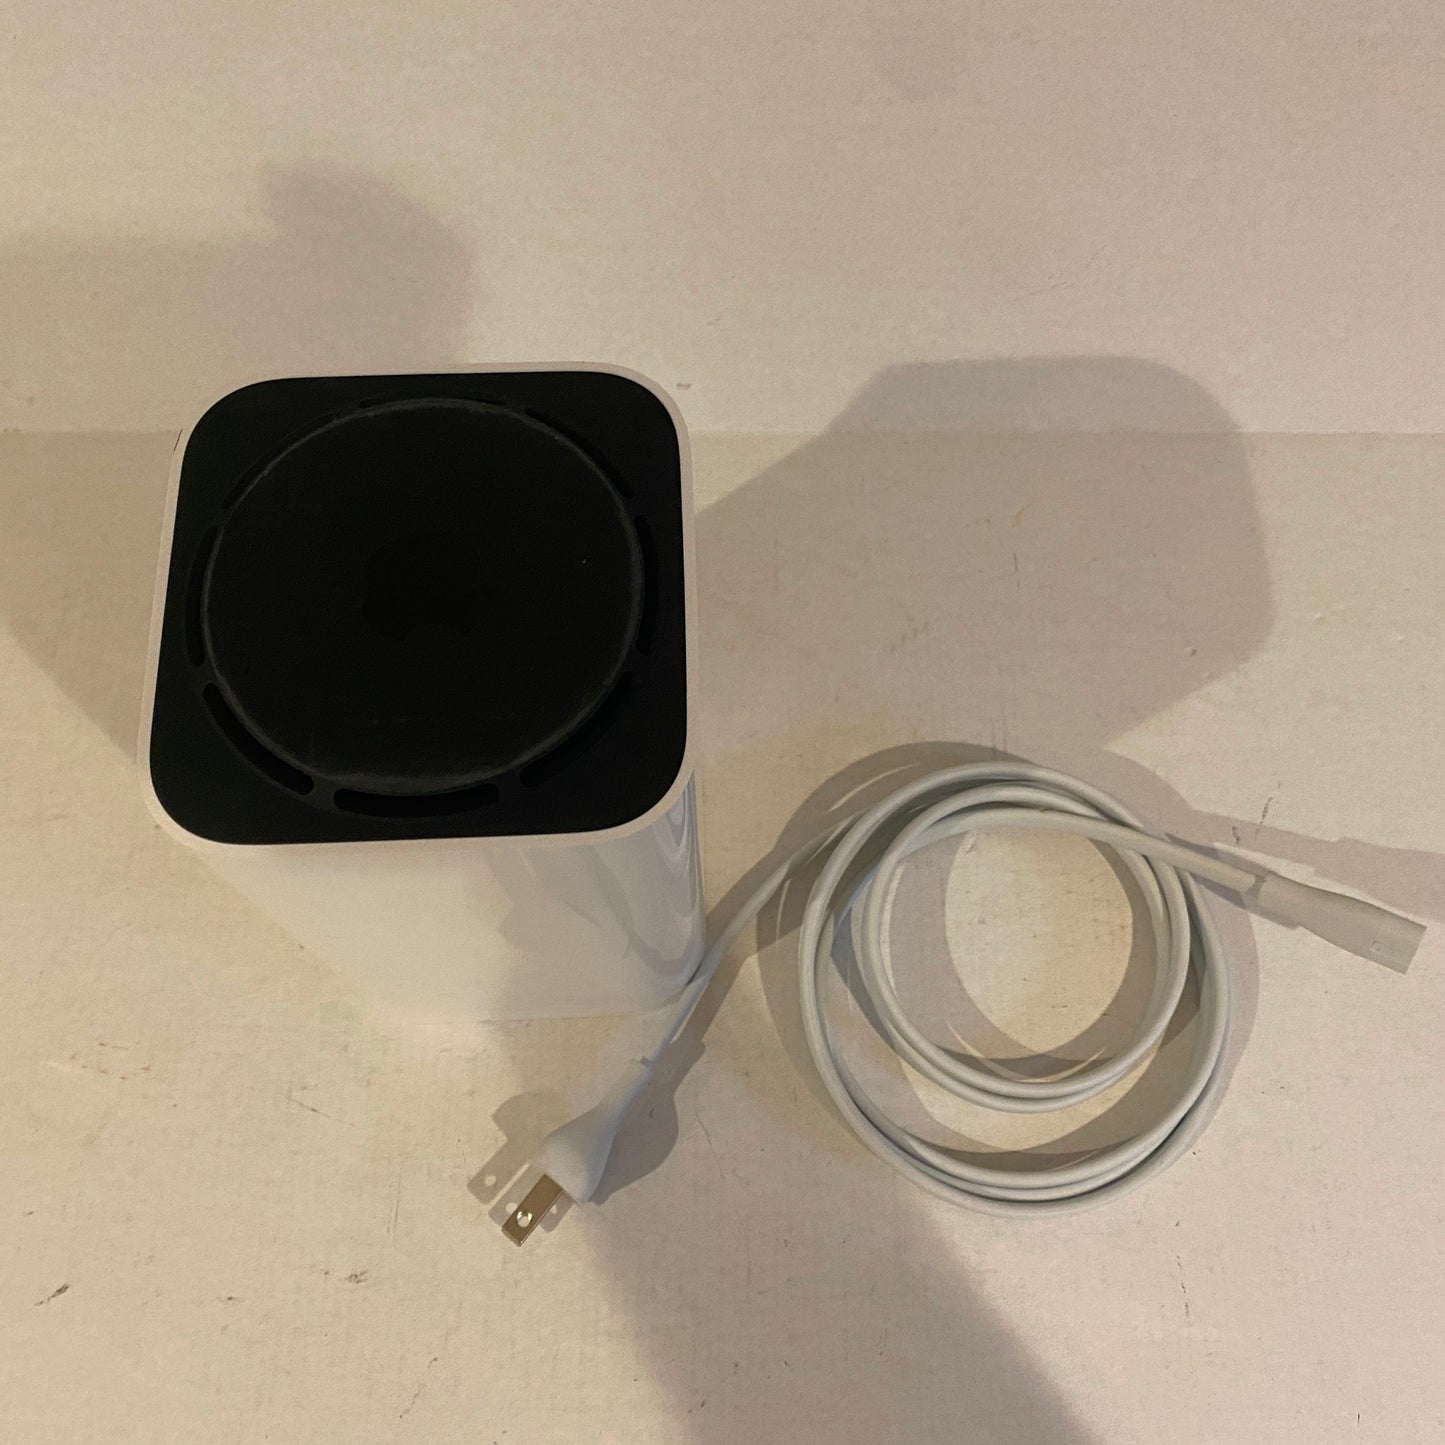 Apple AirPort Extreme 802.11ac Wireless Router 6th Gen - A1521